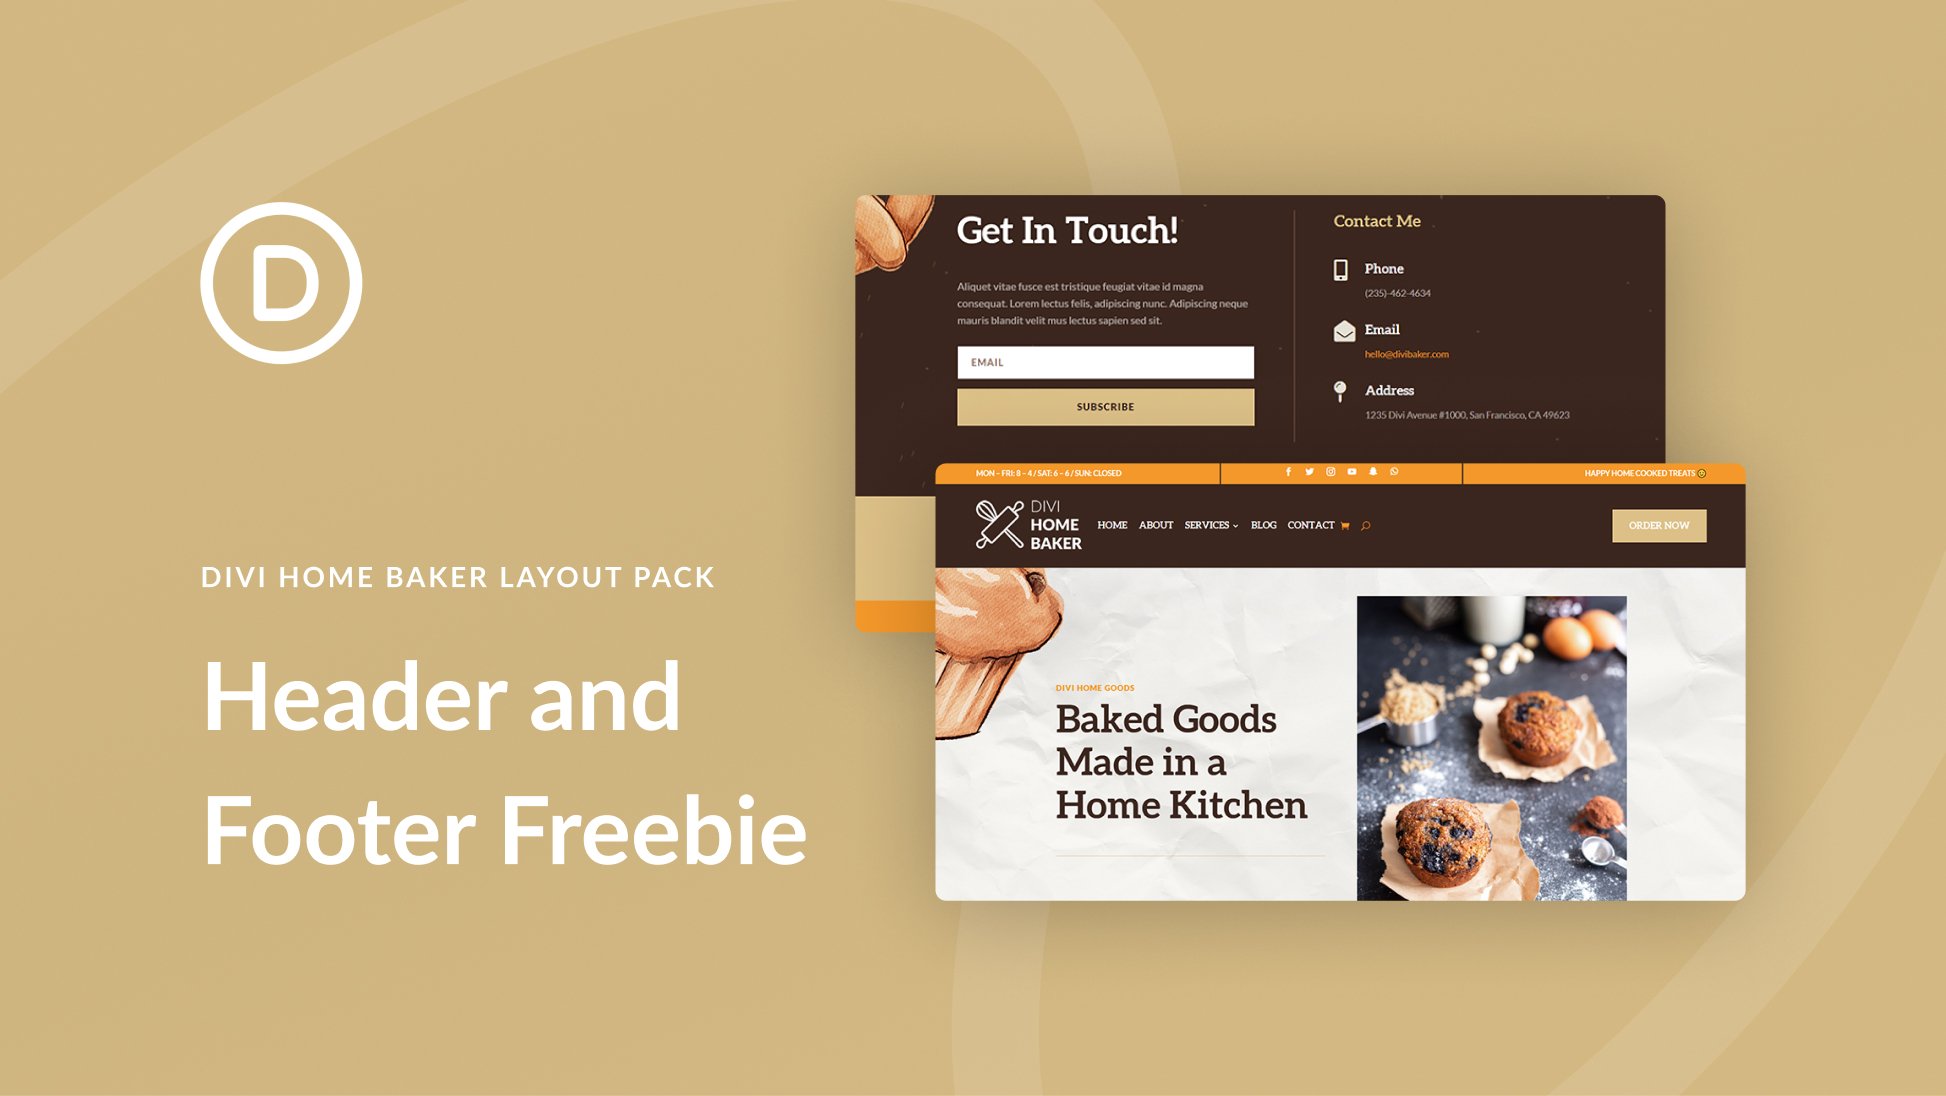 Download a FREE Header & Footer for Divi’s Home Baker Layout Pack